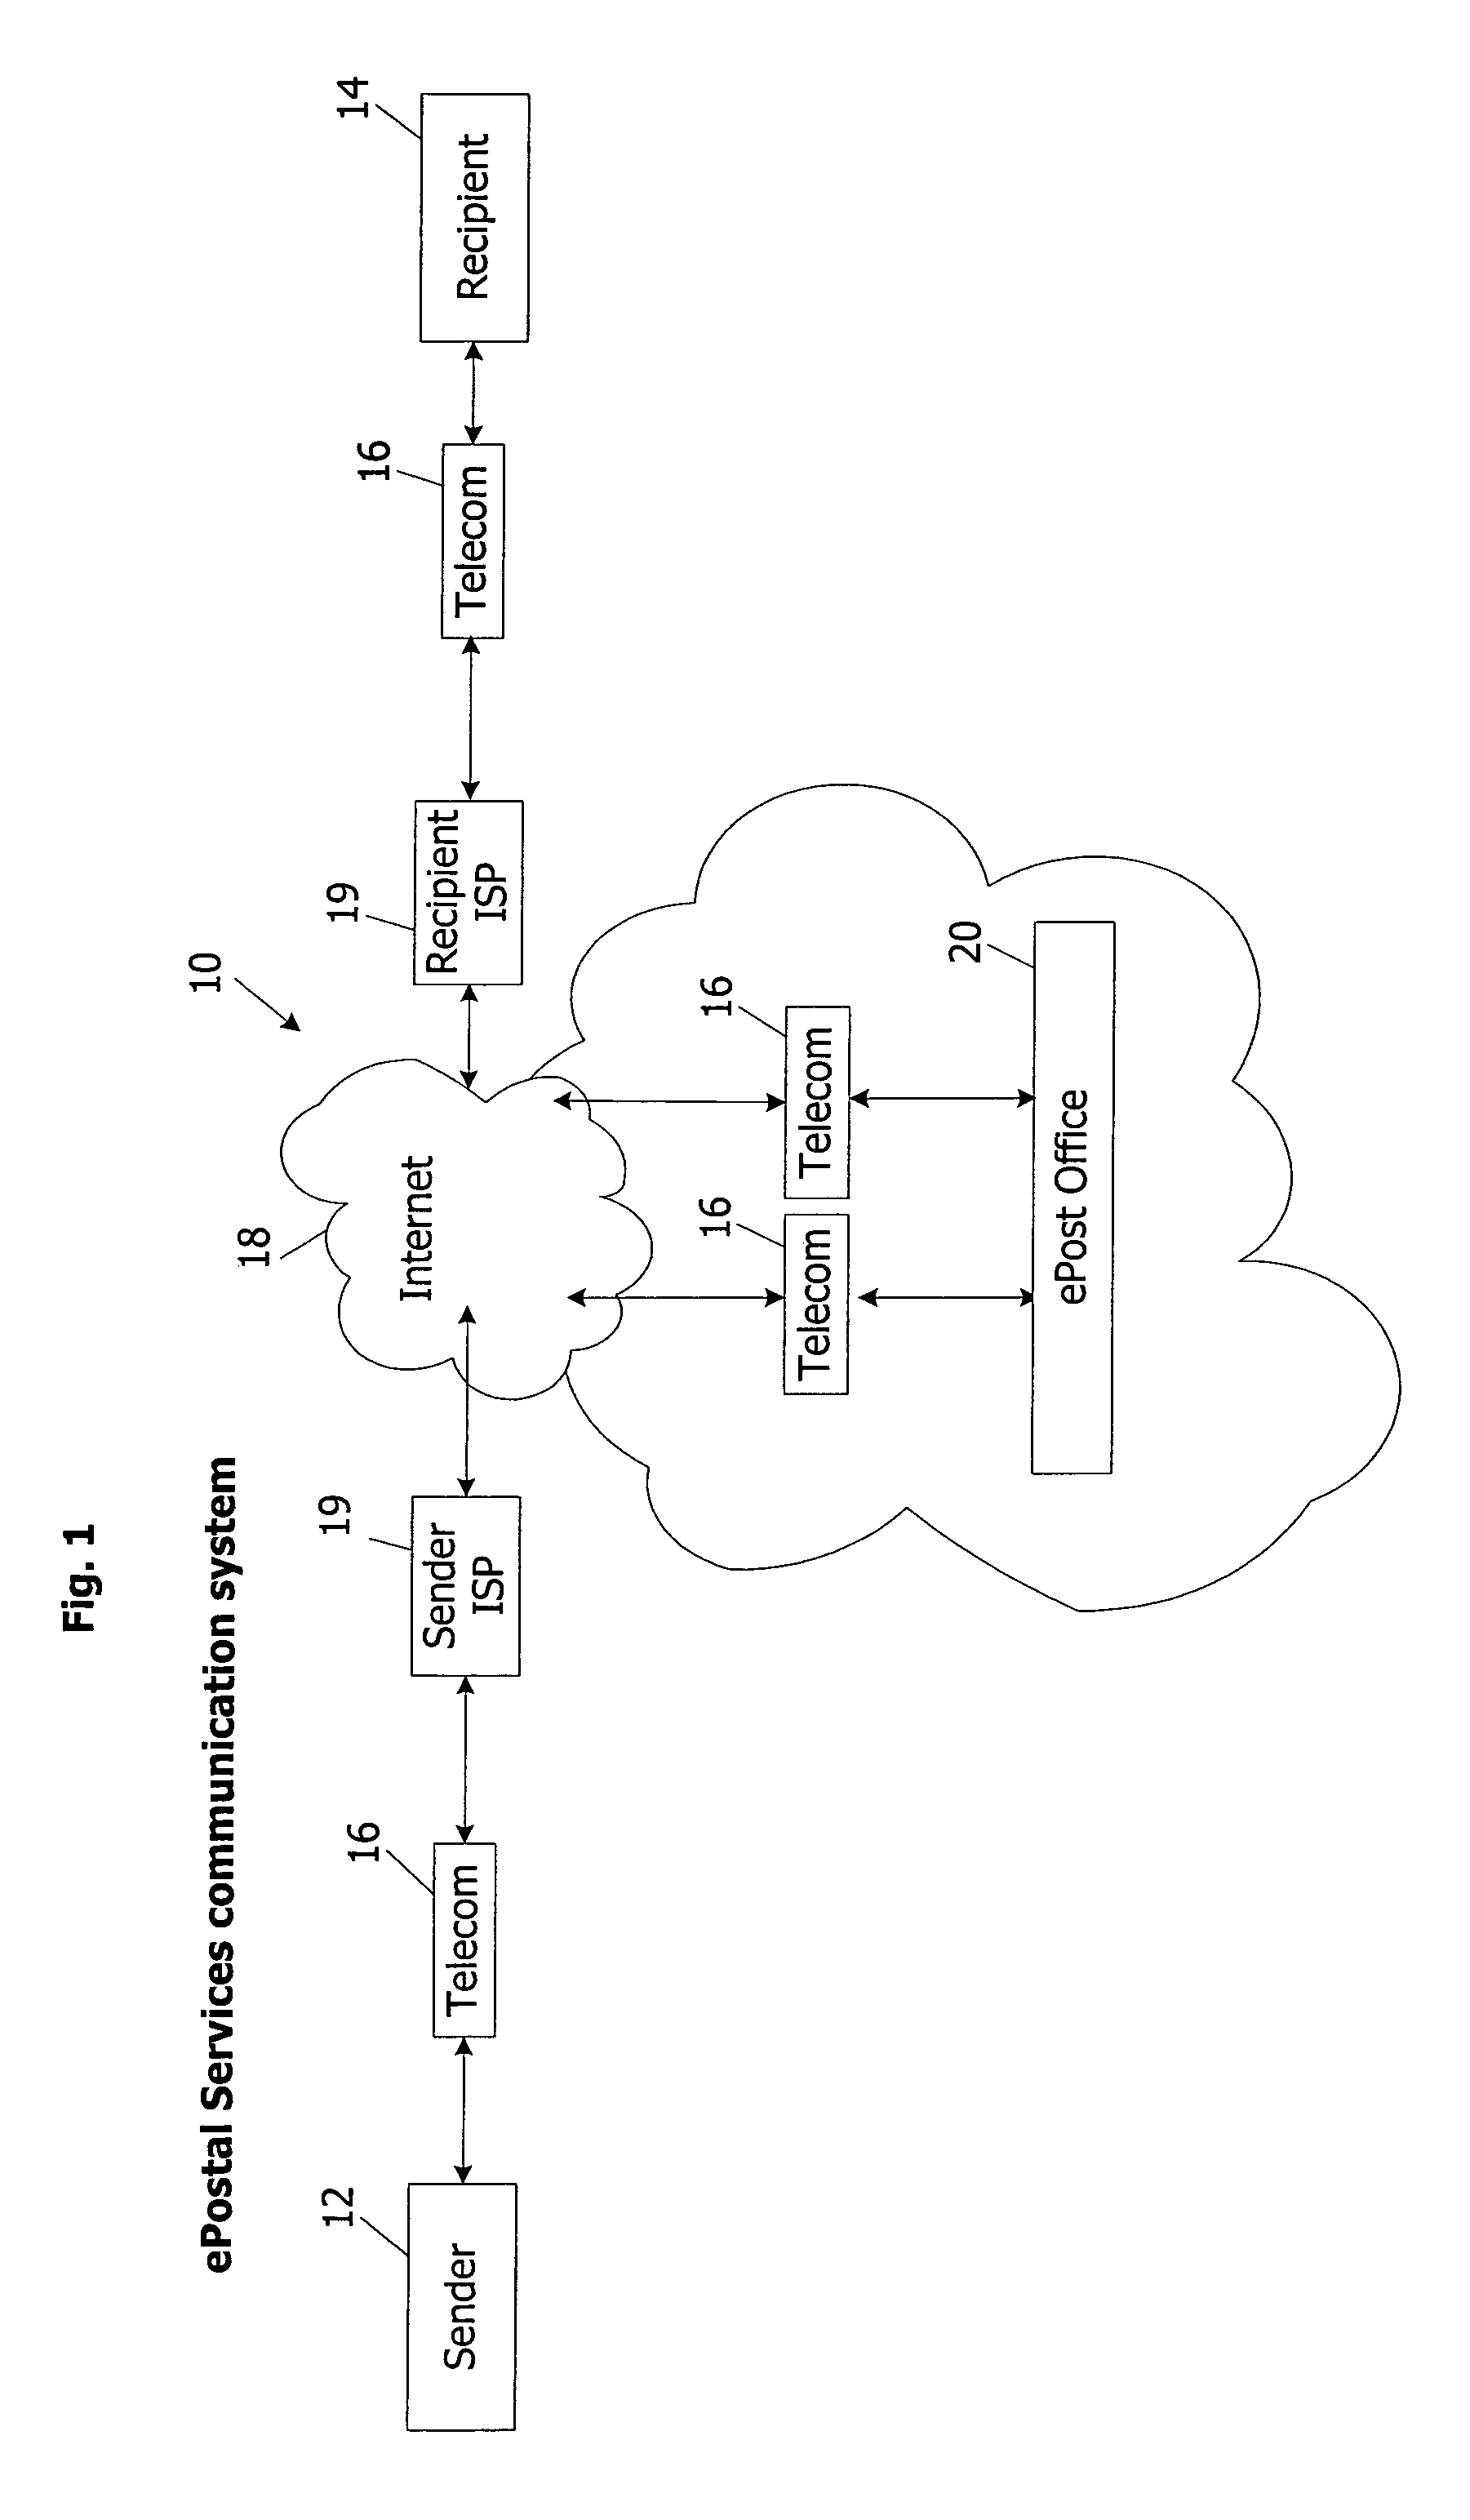 Messaging and document management system and method